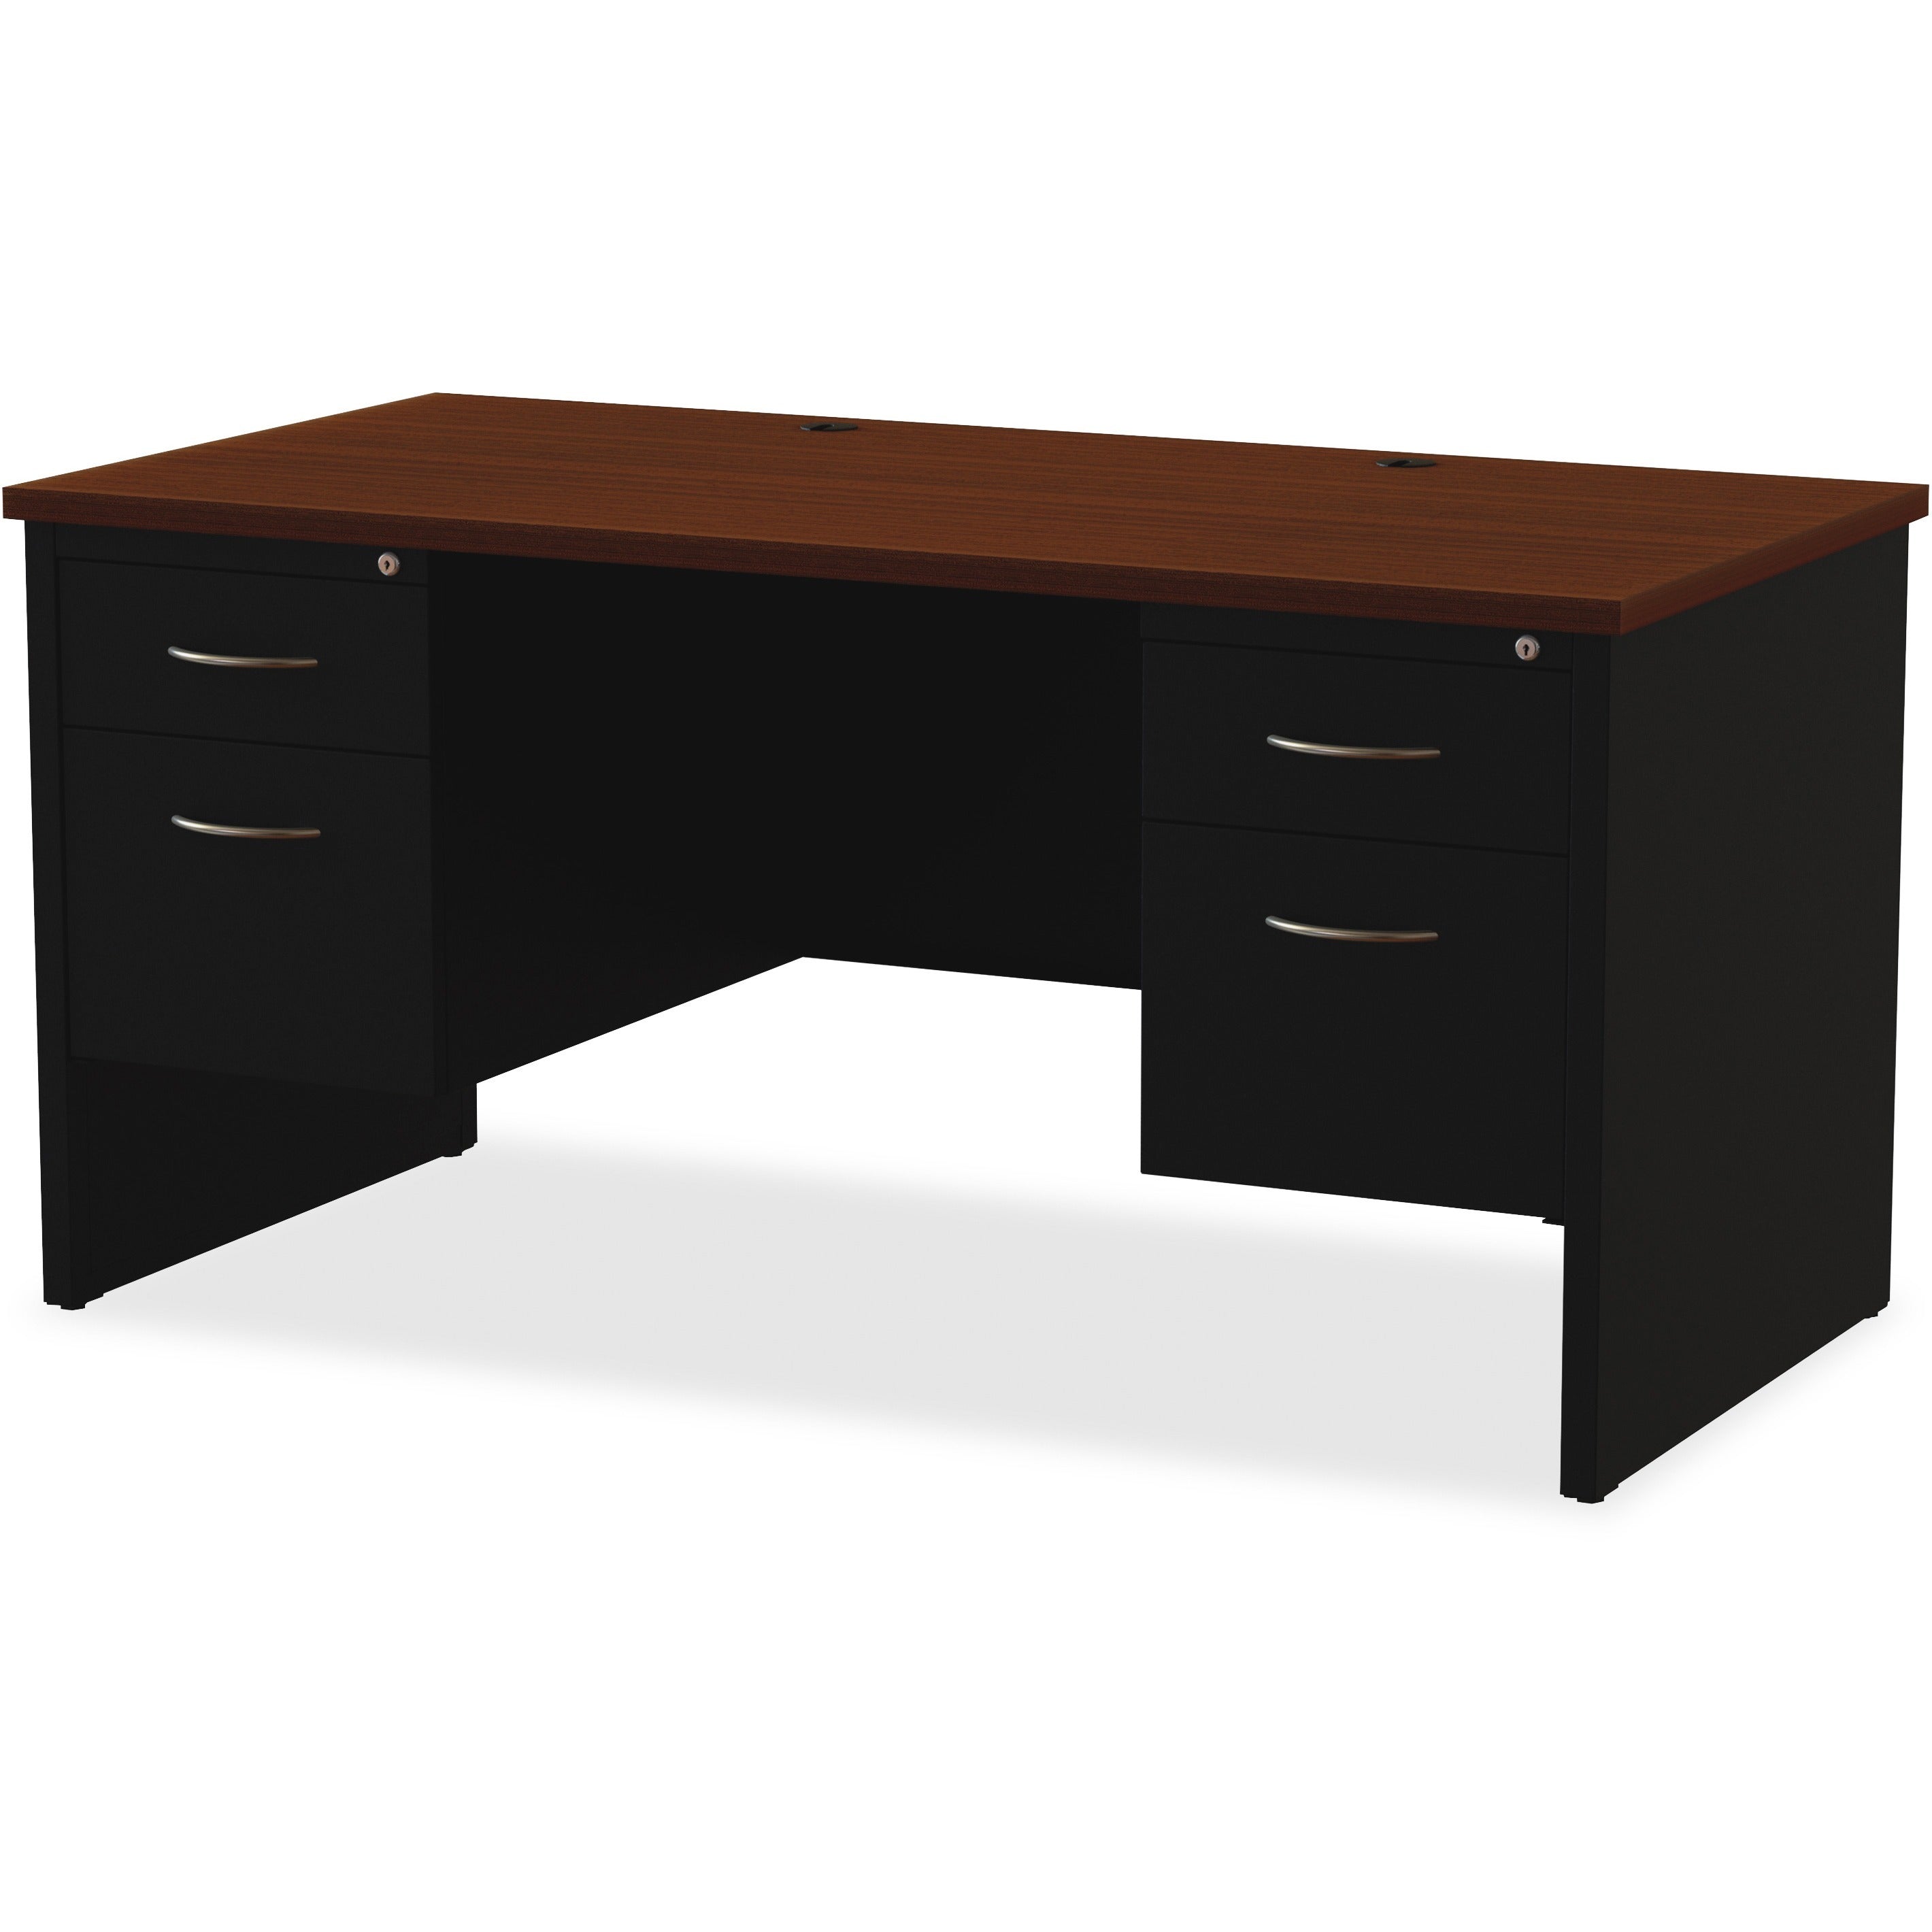 Lorell Fortress Modular Series Double-Pedestal Desk - 60" x 30" , 1.1" Top - 4 x Box, File Drawer(s) - Double Pedestal - Material: Steel - Finish: Walnut Laminate, Black - Scratch Resistant, Stain Resistant, Ball-bearing Suspension, Grommet, Handle, - 